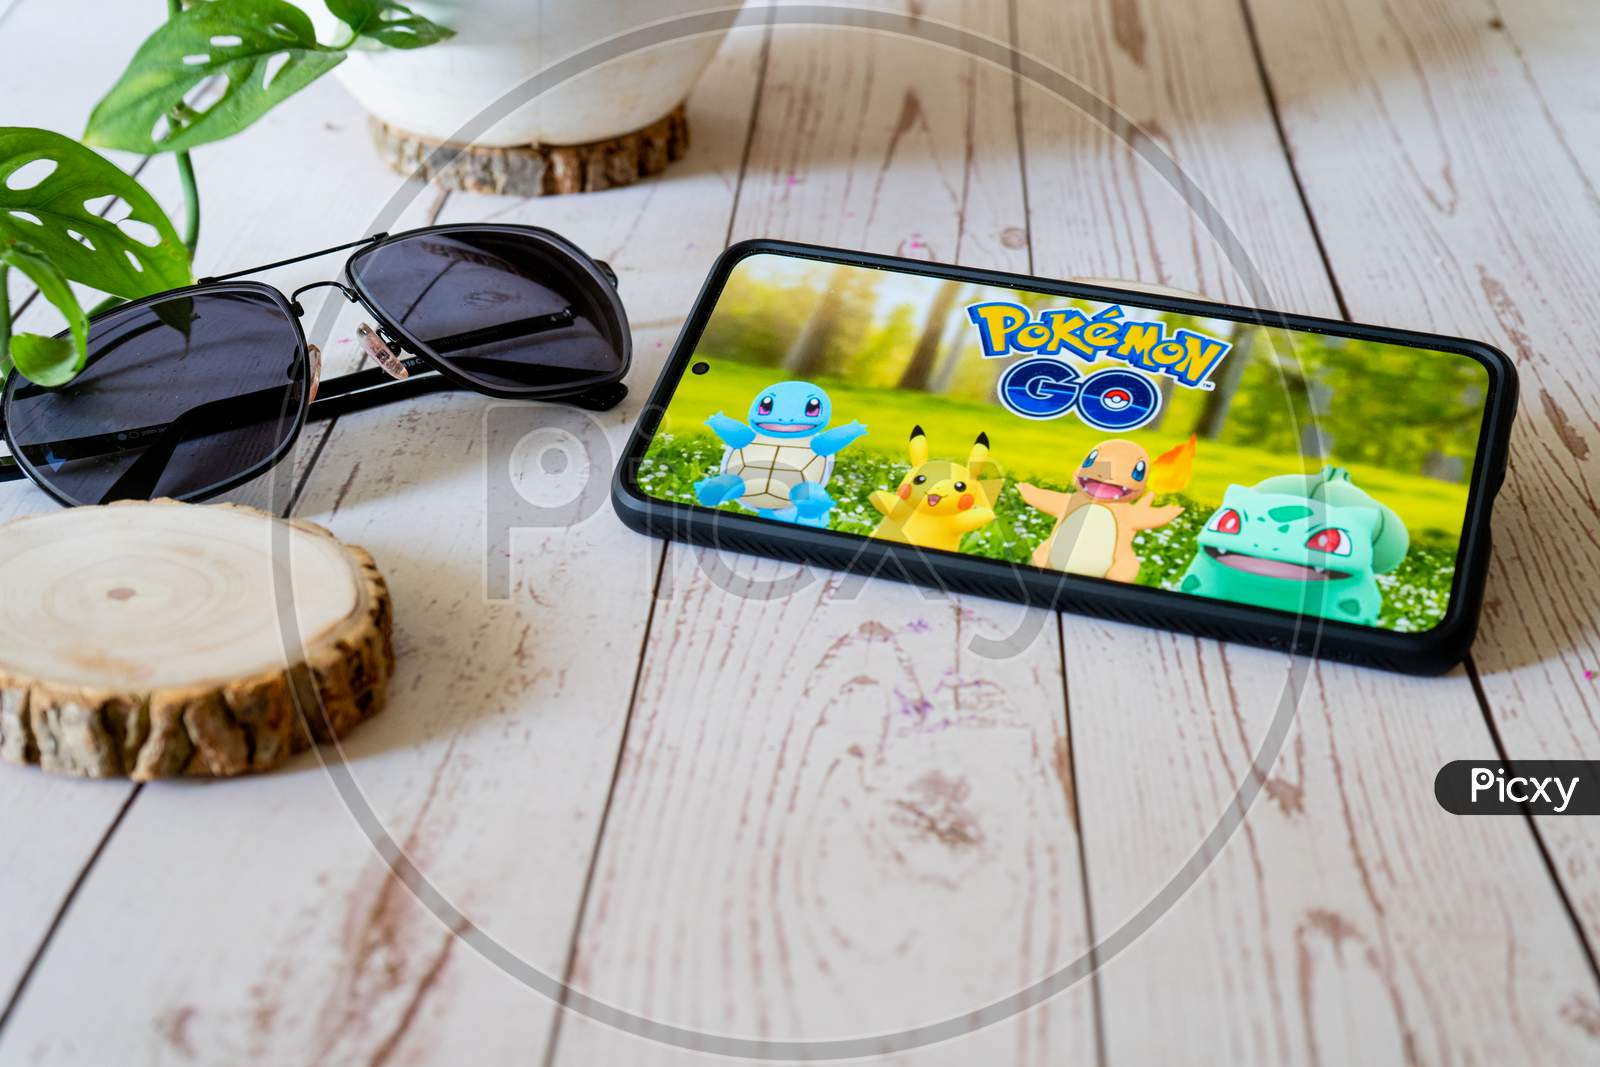 Famous Augmented Reality Virtual Game Pokemon Go Playing On A Mobile Phone On A Wooden Table Outdoors With Plants Goggles Showing People Enjoying This Multiplayer Game